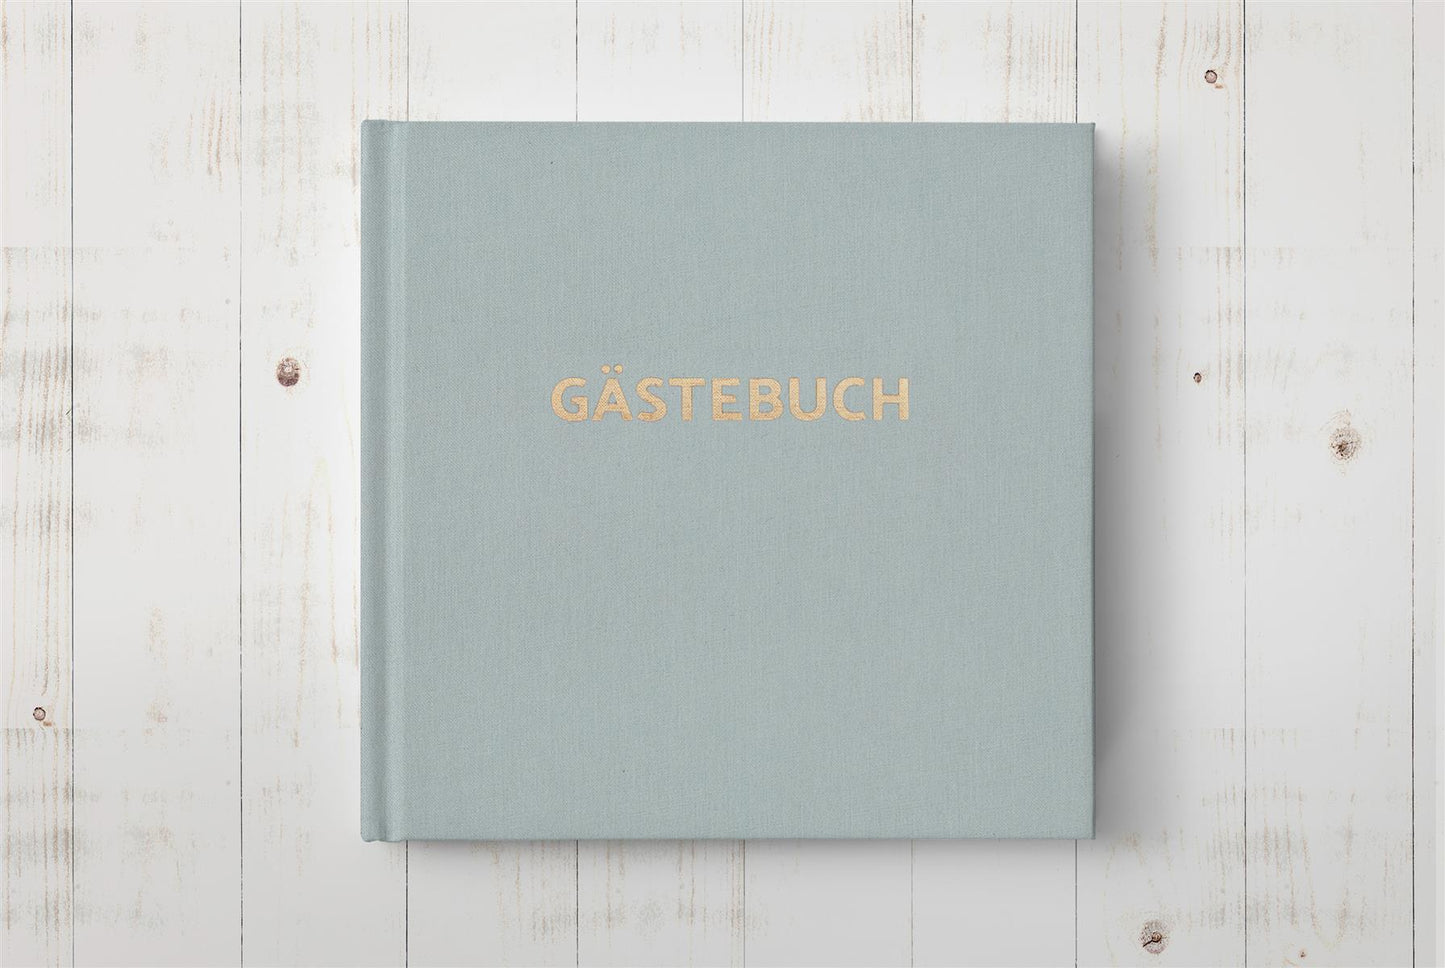 Gästebuch - Deluxe Mint (square)